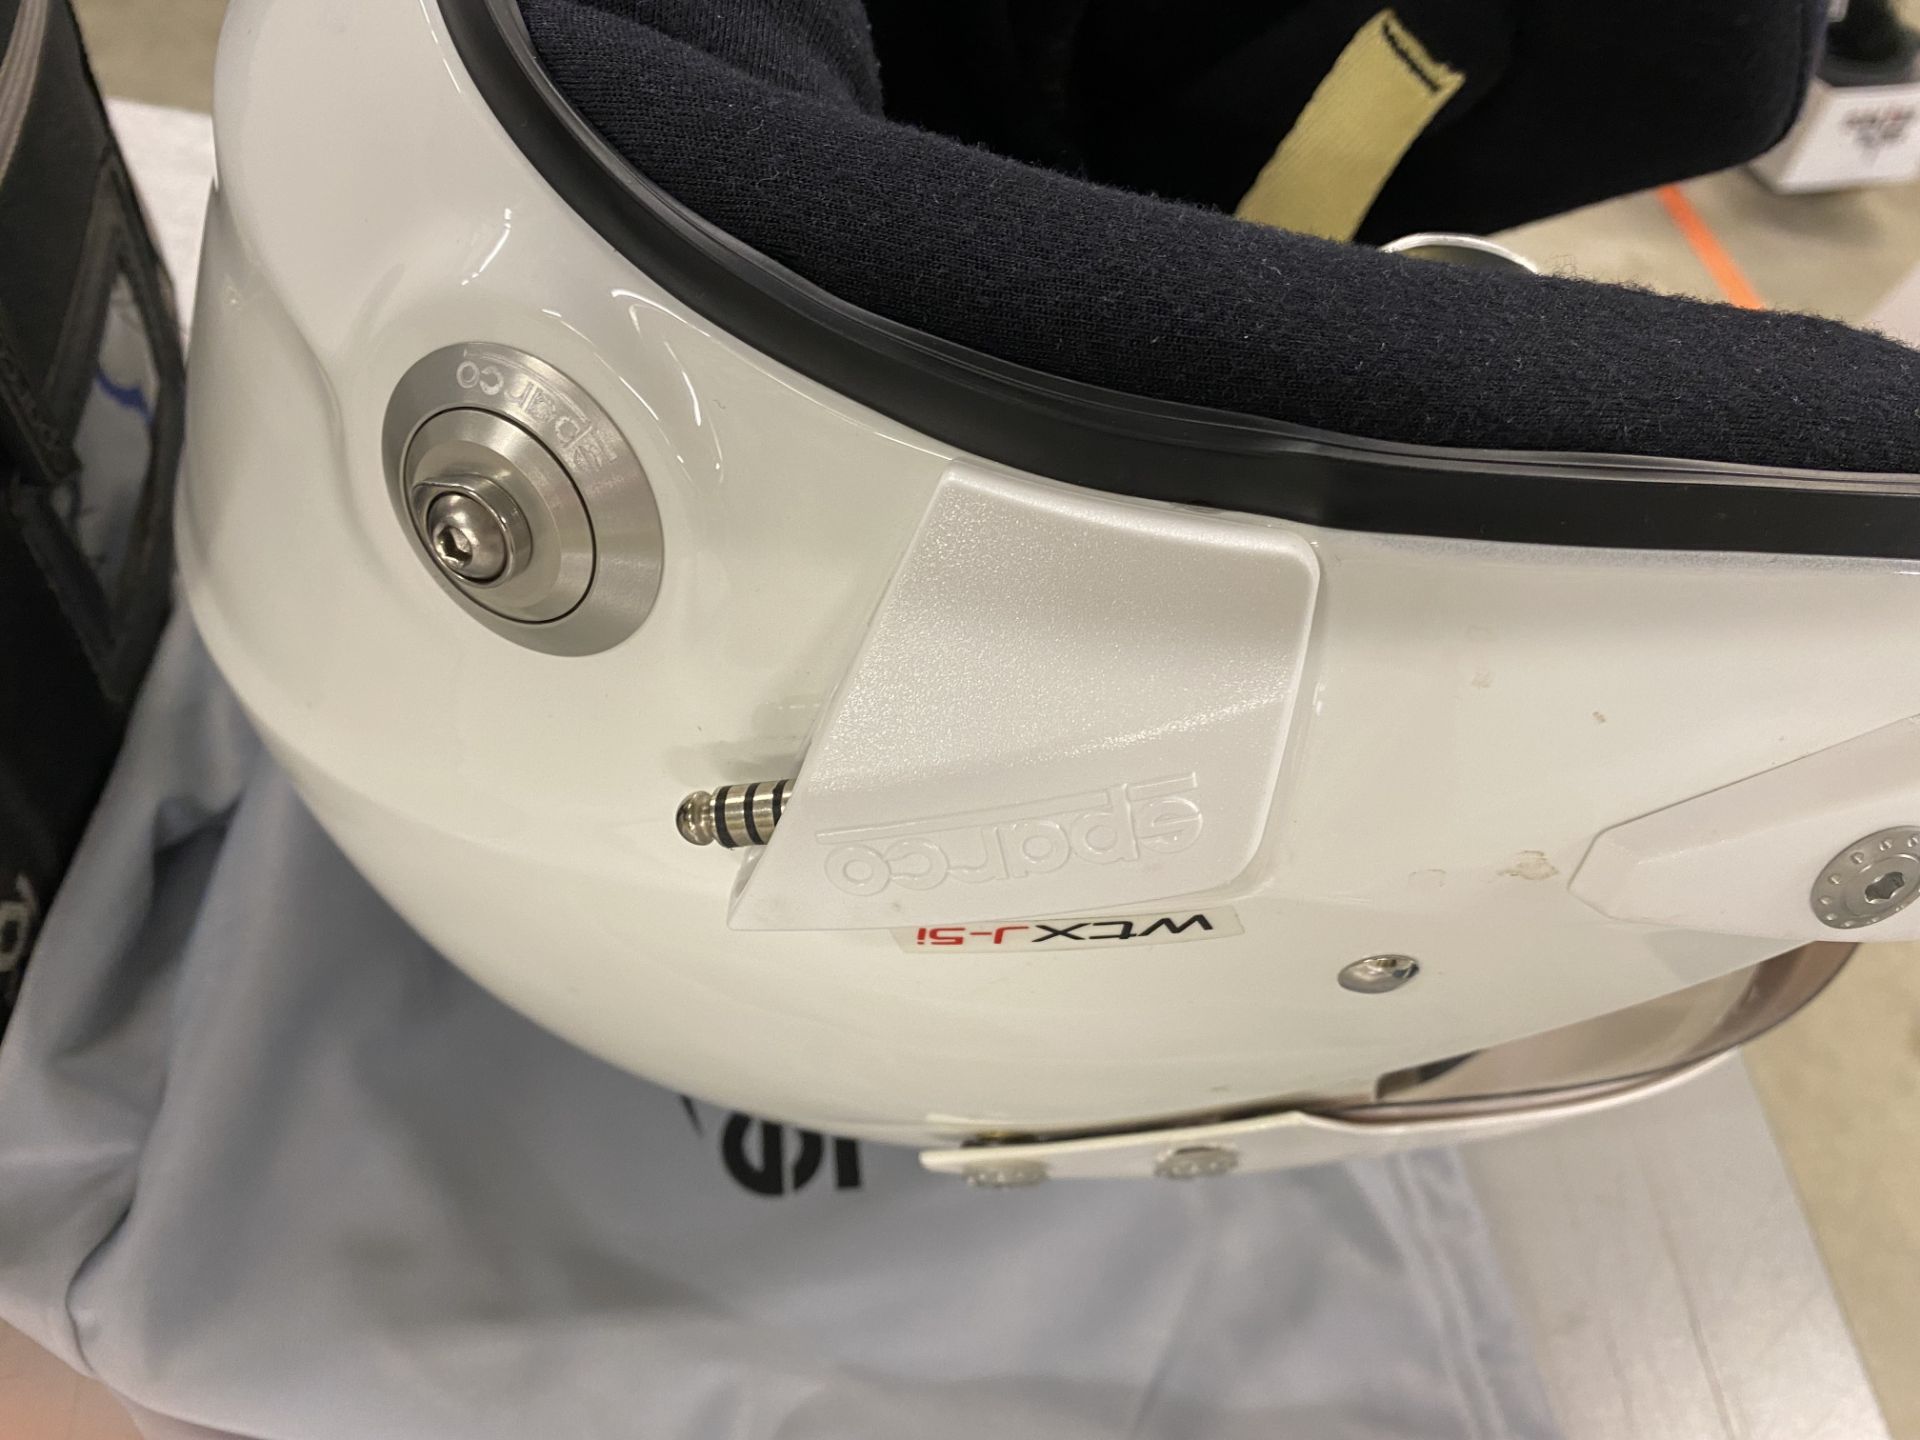 Sparco WTXJ-5i open face racing helmet with microphone and connector with cover and storage bag size - Bild 4 aus 6